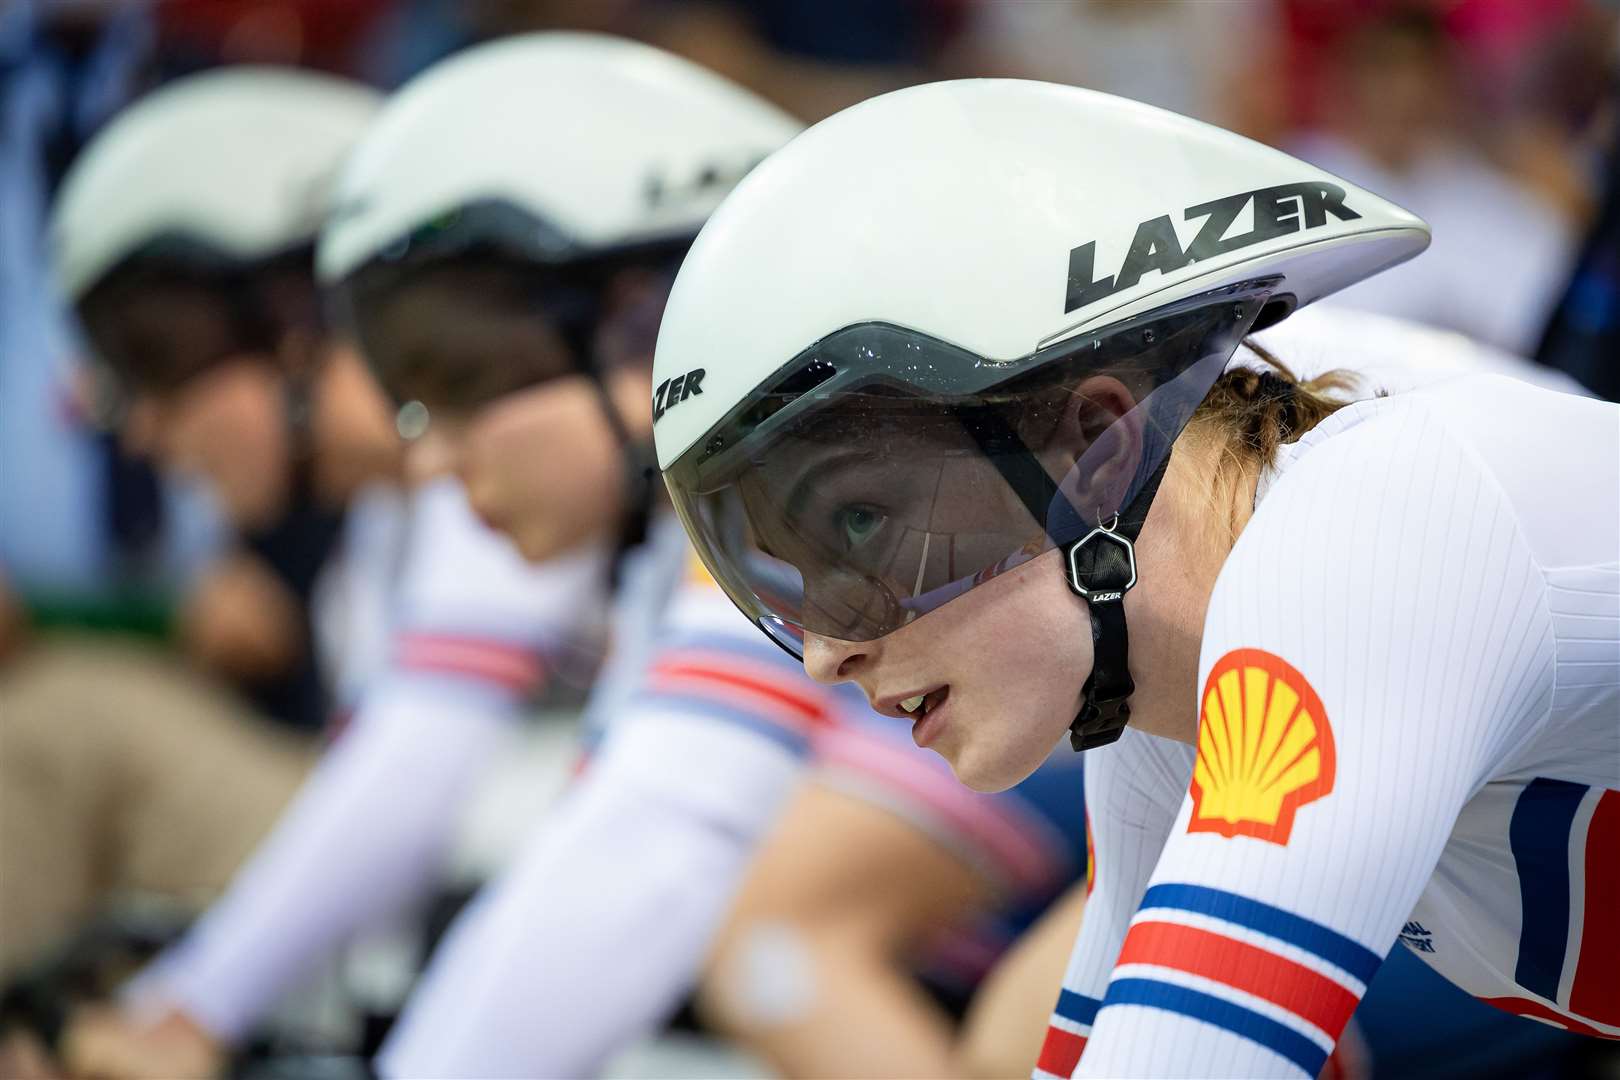 Lauren Bell gets ready to ride at the world championships. Picture by Alex Whitehead/SWpix.com